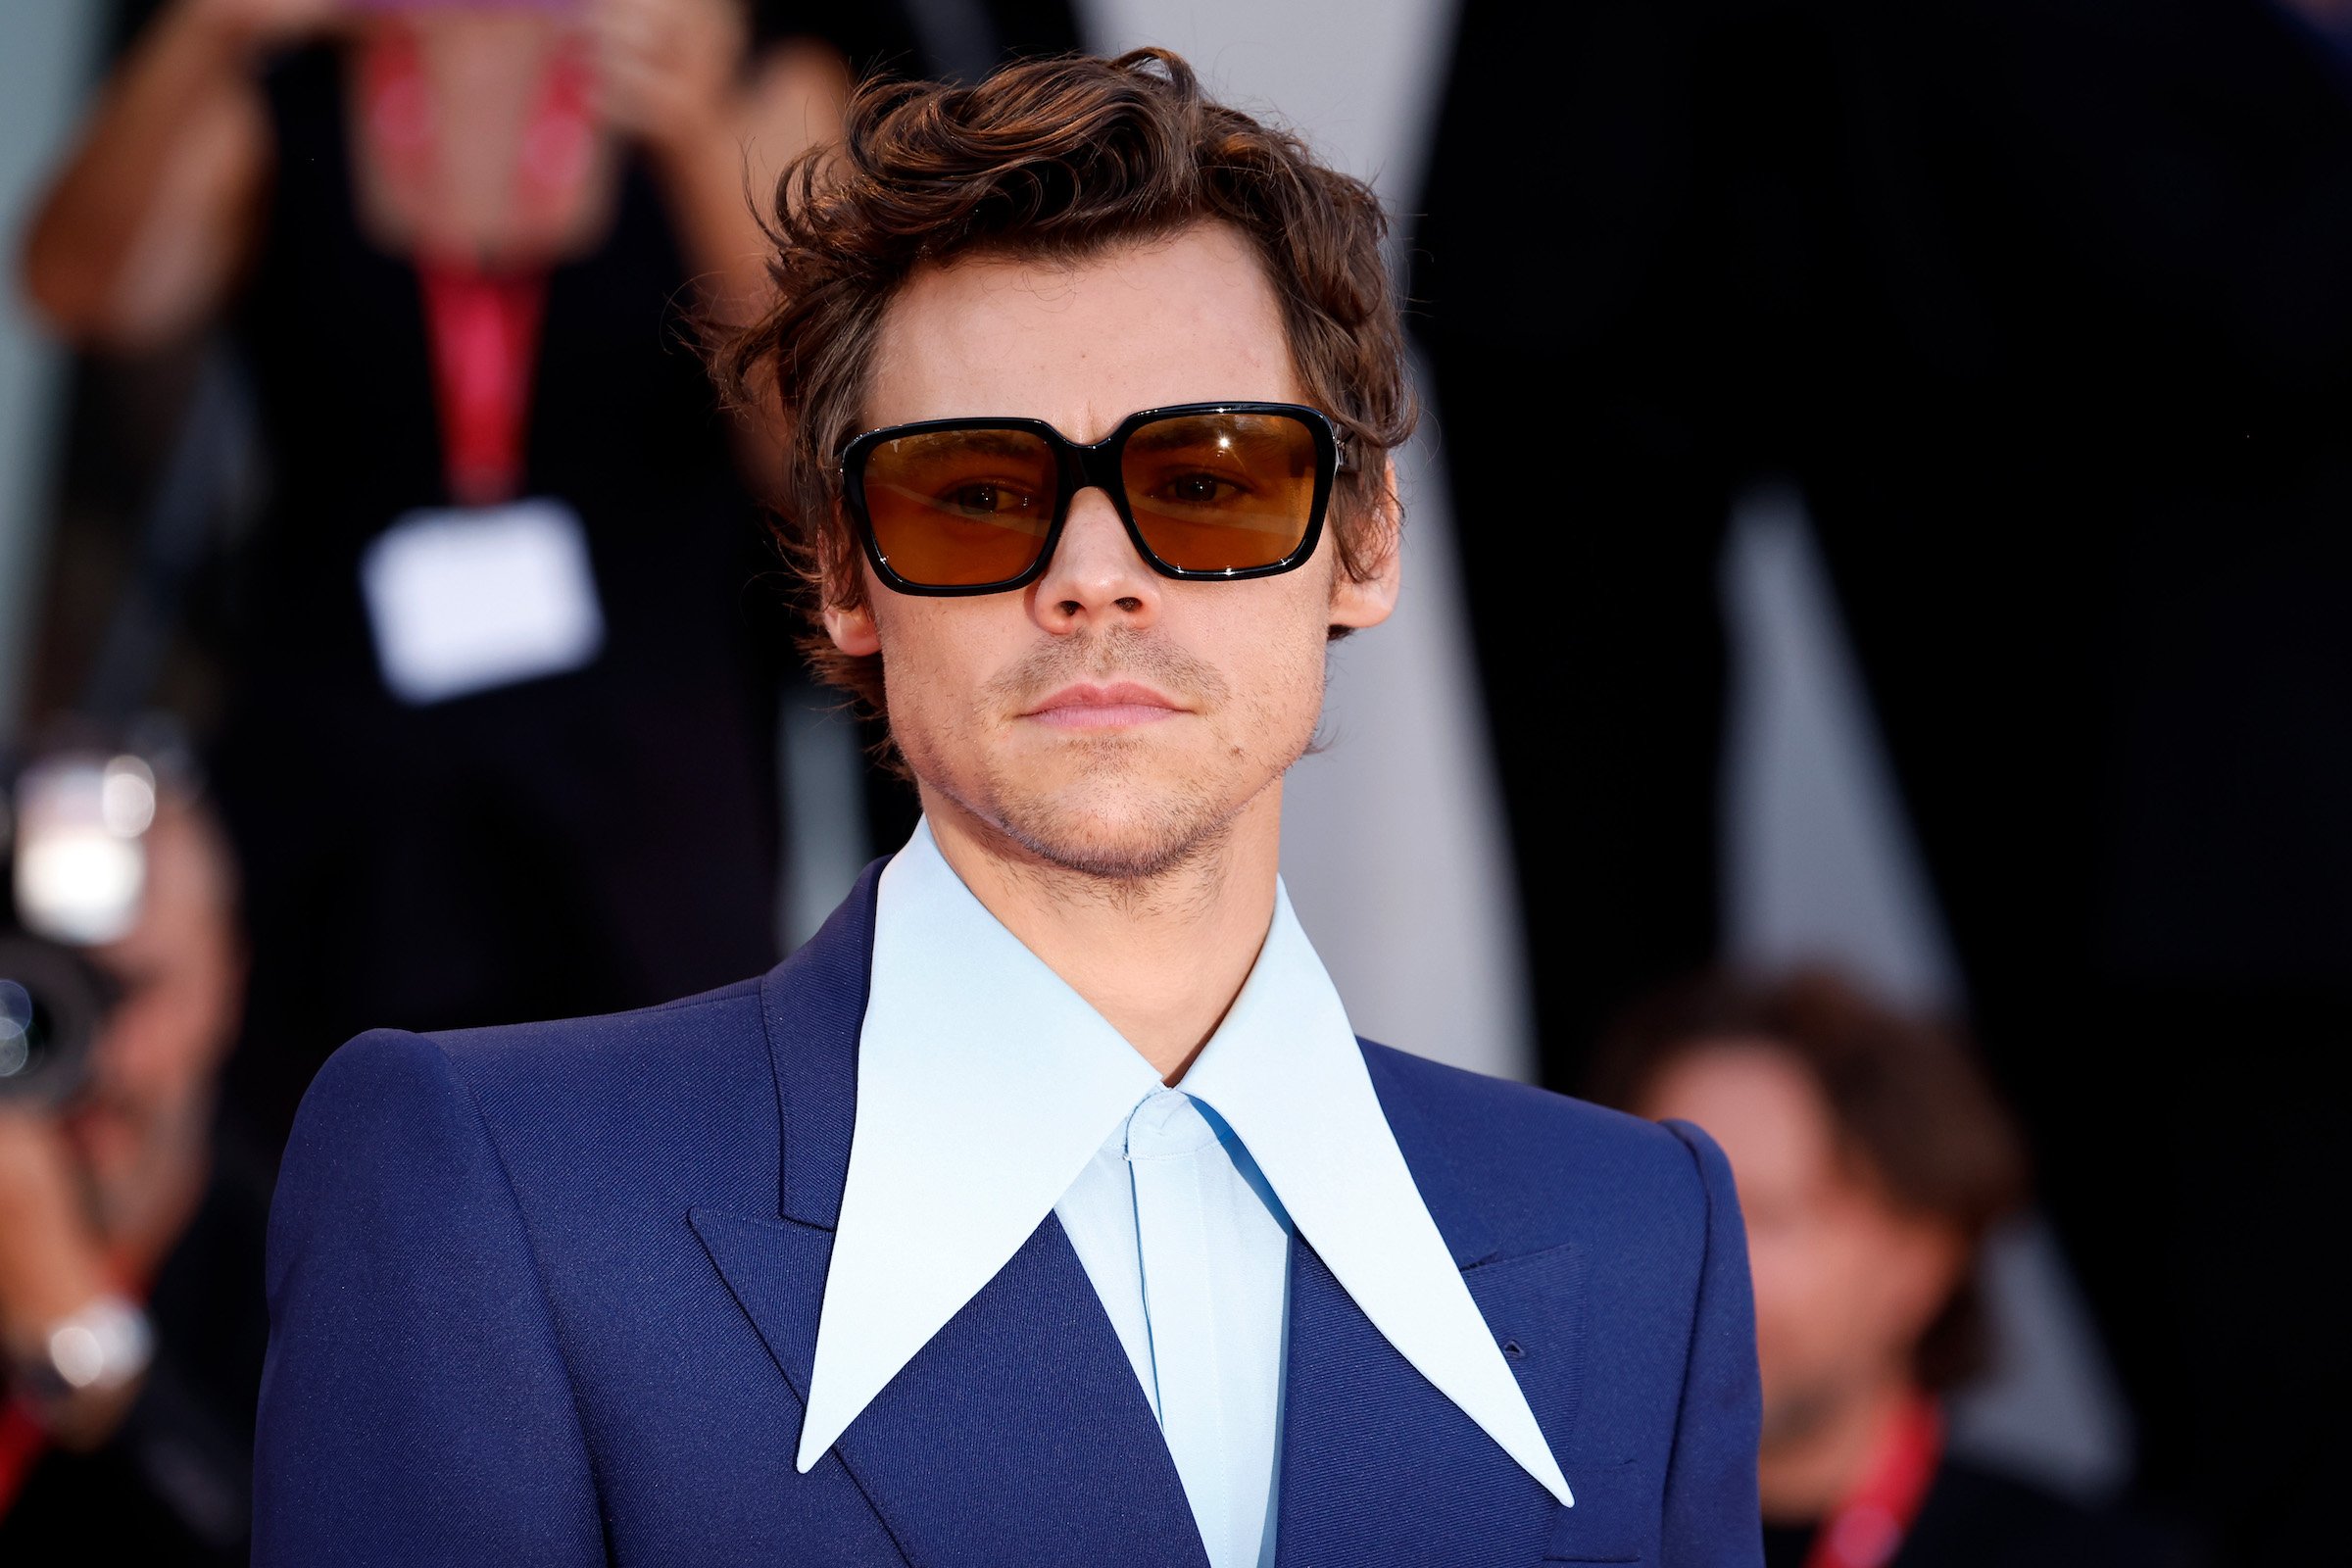 Harry Styles, whose song 'As It Was' just set a new Billboard Hot 100 chart record, wearing a blue suit